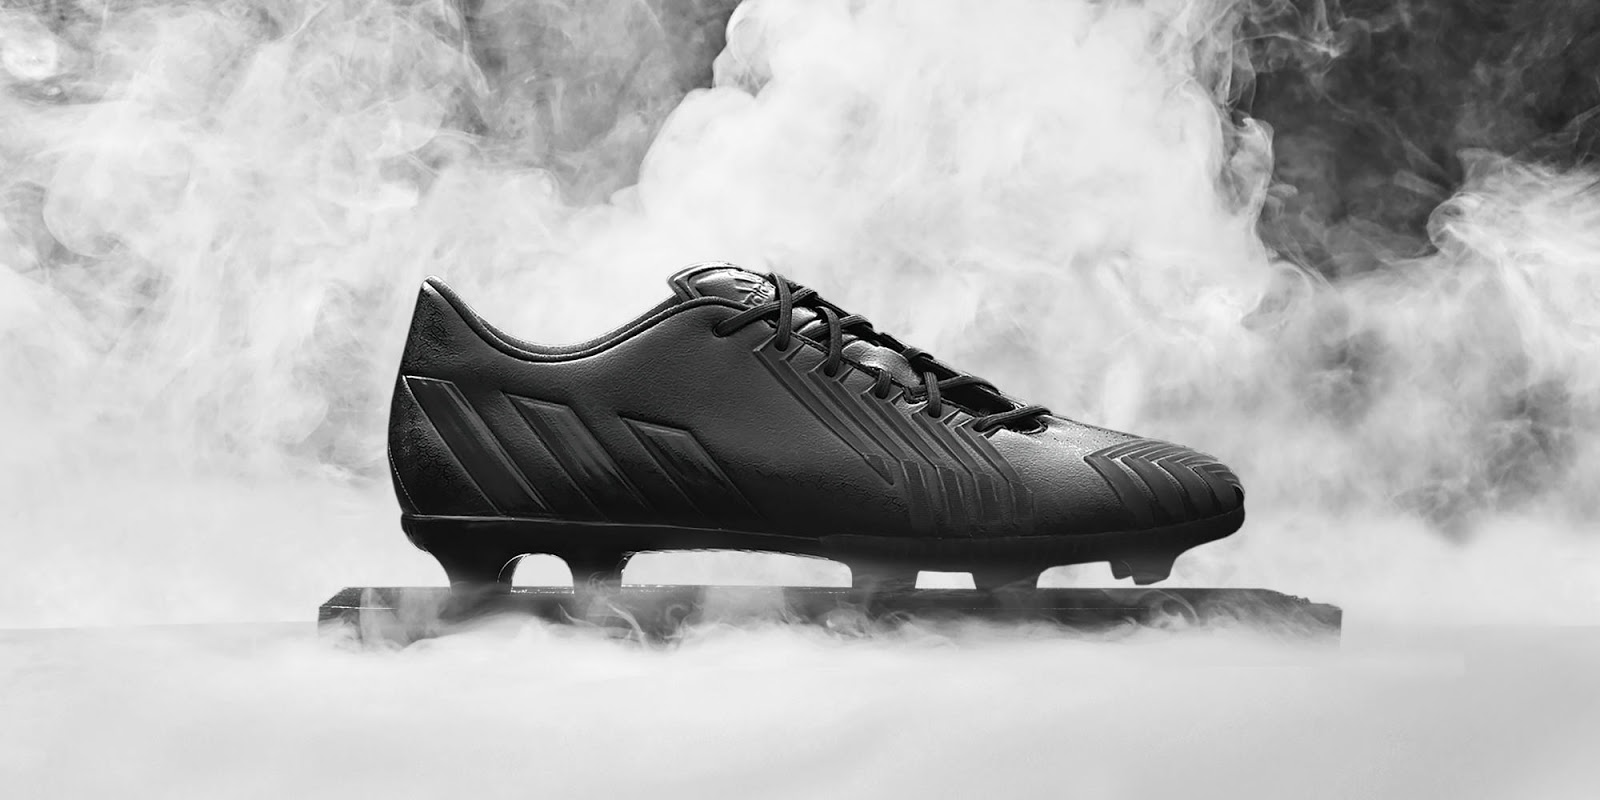 Adidas Predator Instinct 2014 Black-Out Boot Launched - Footy